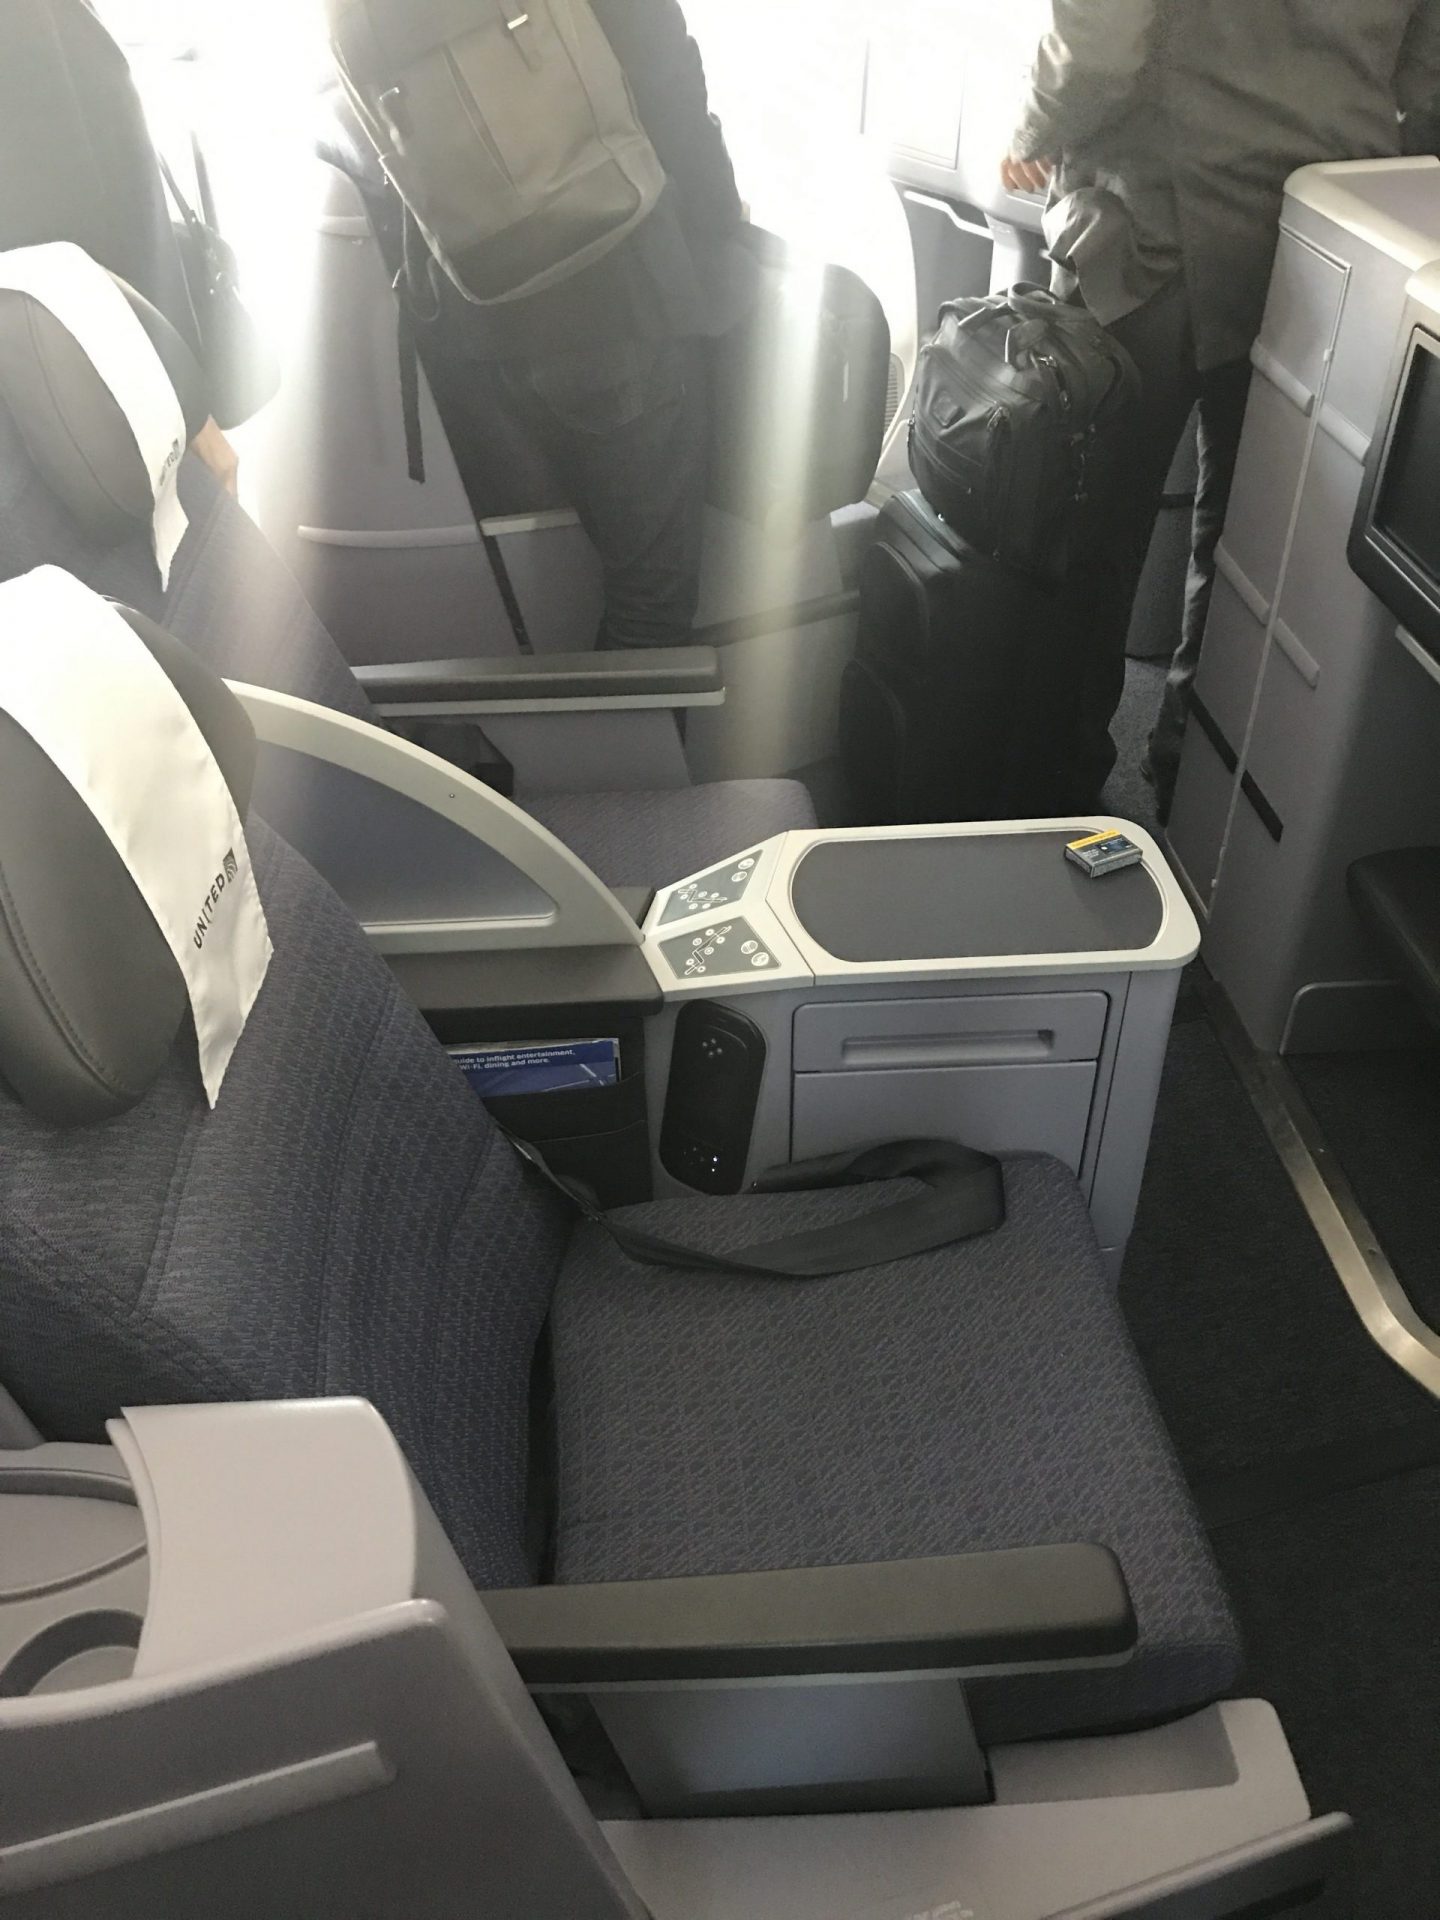 united polaris business class cabin boeing 787 9 san francisco sfo to denver den scaled - United Polaris Business Class Boeing 787-9 San Francisco SFO to Denver DEN review